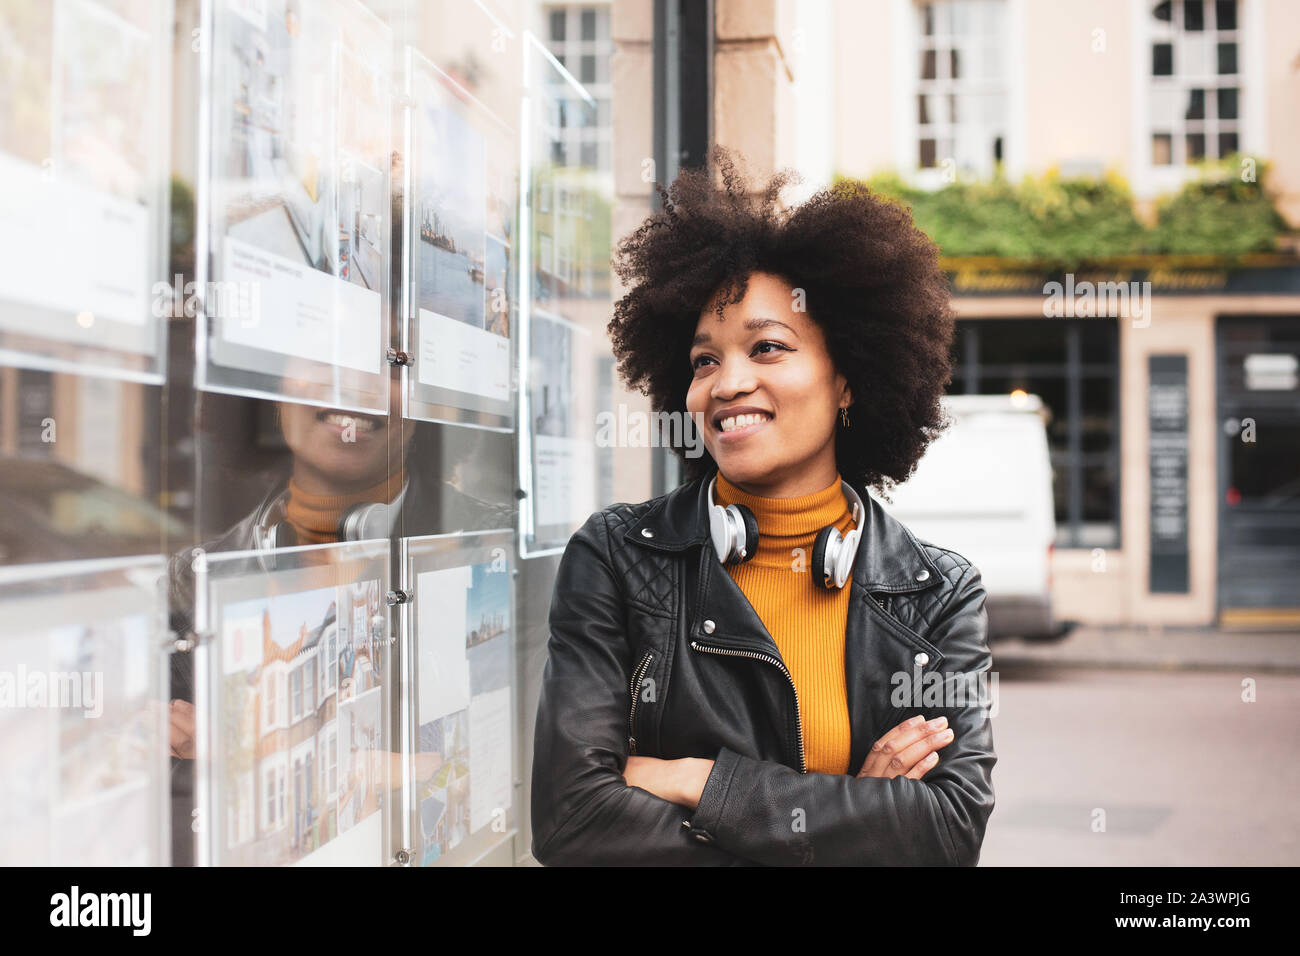 Young adult african american looking at estate agents window Stock Photo